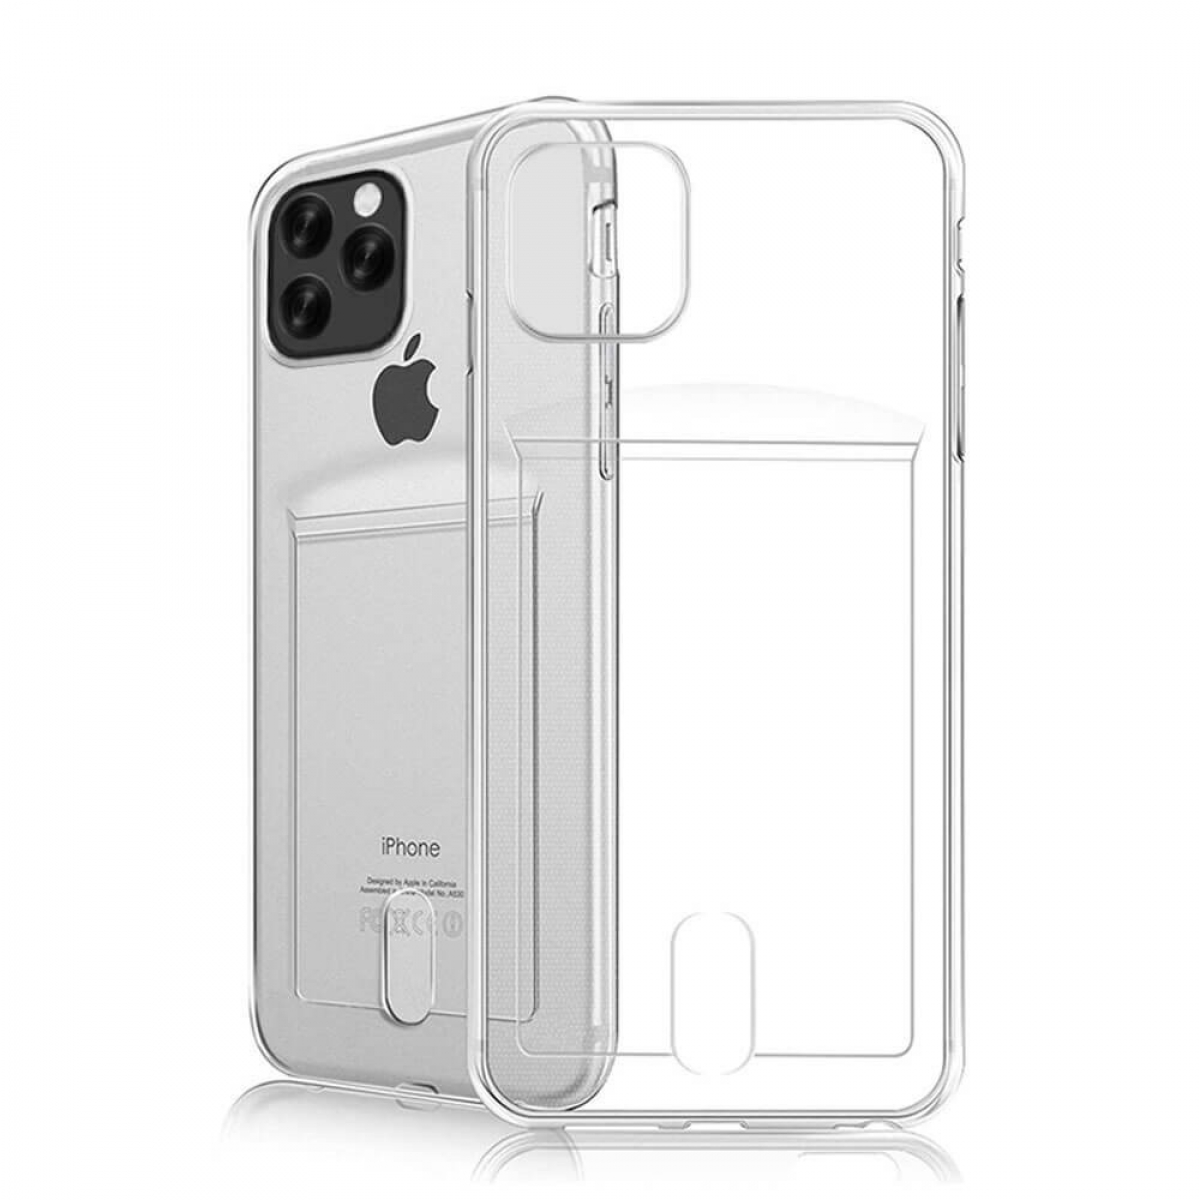 Pro, Kartenhülle Backcover, iPhone 12 Apple, Transparent 2in1, CASEONLINE